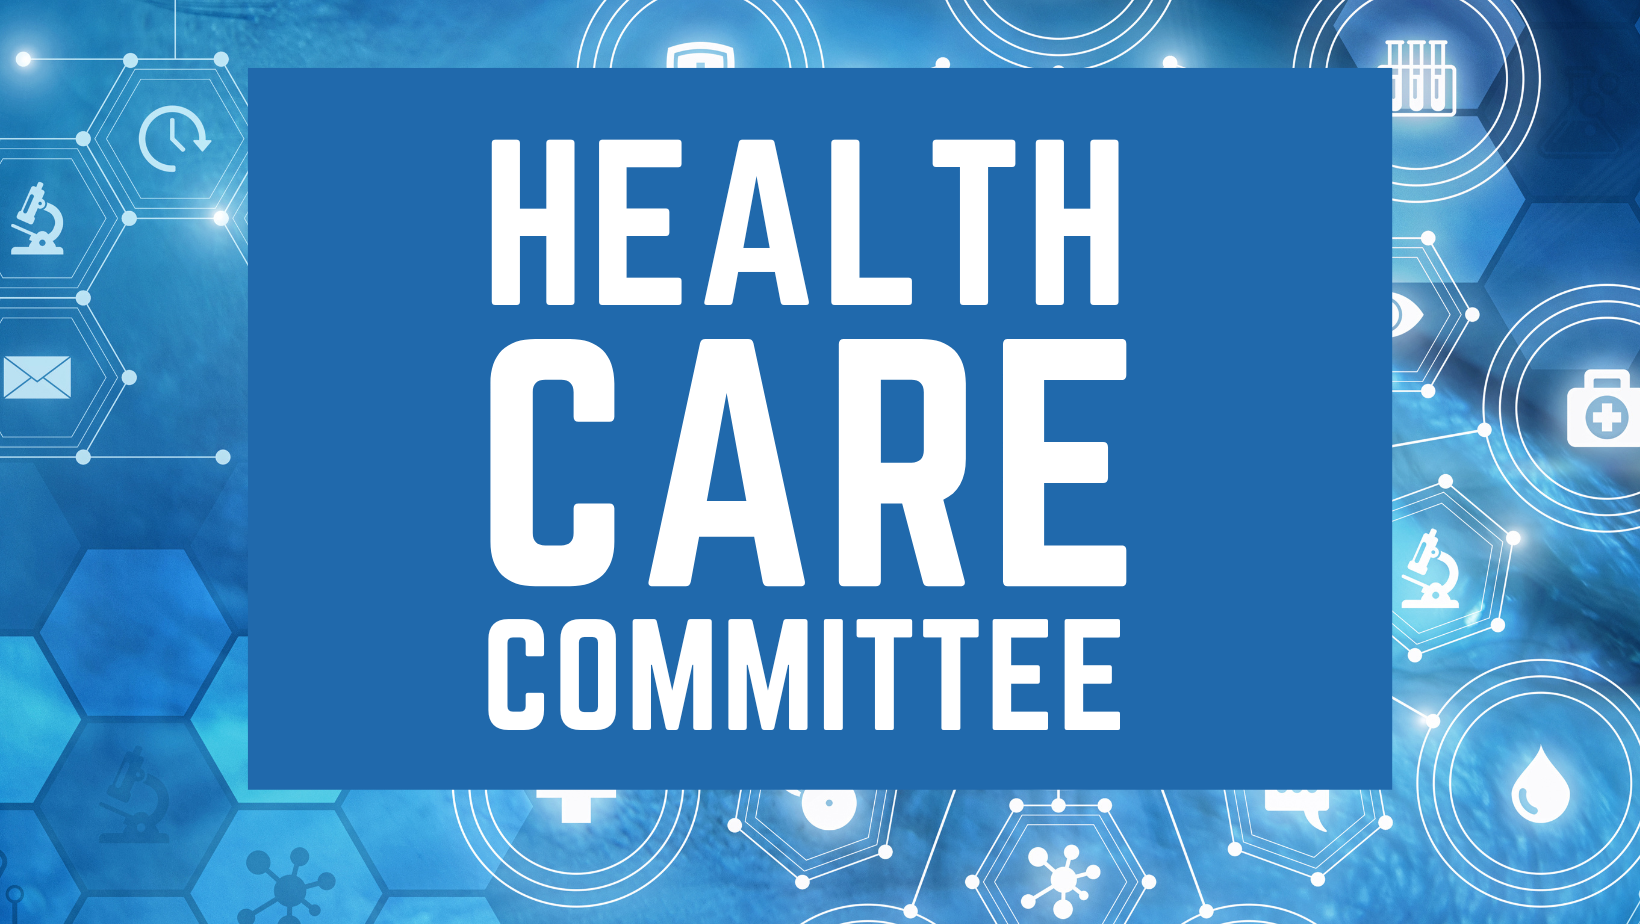 Health Care Committee in white text on a blue rectangle with geometric shapes in a variety of blue colors in the far background